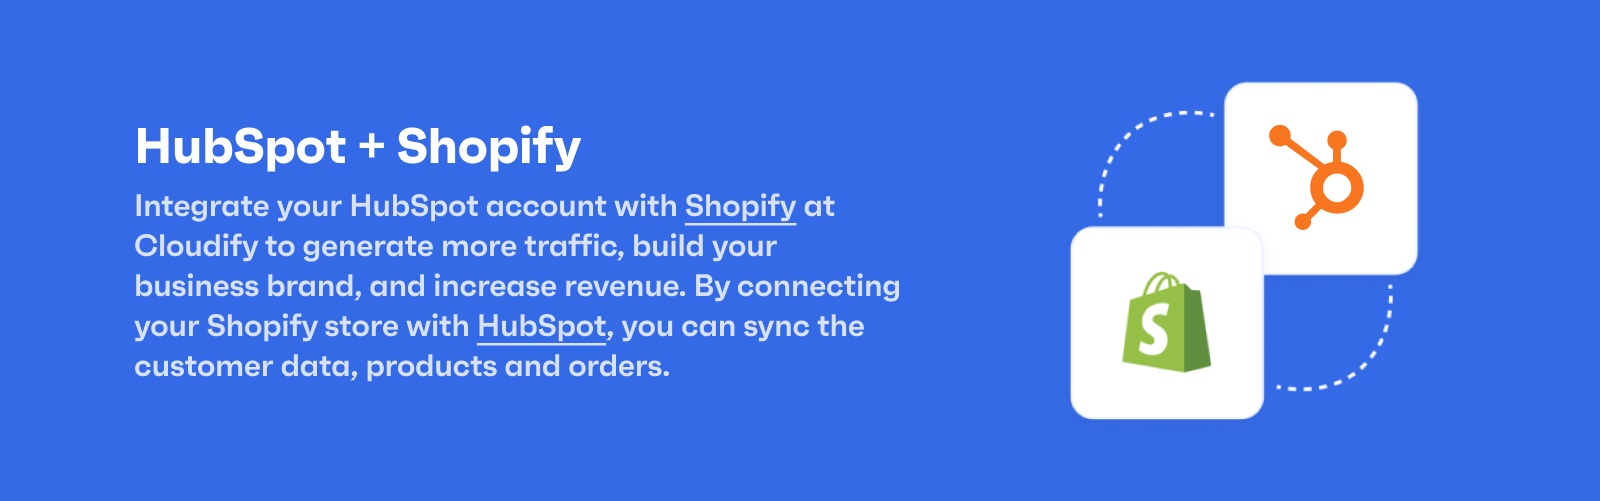 hb-shopify.png